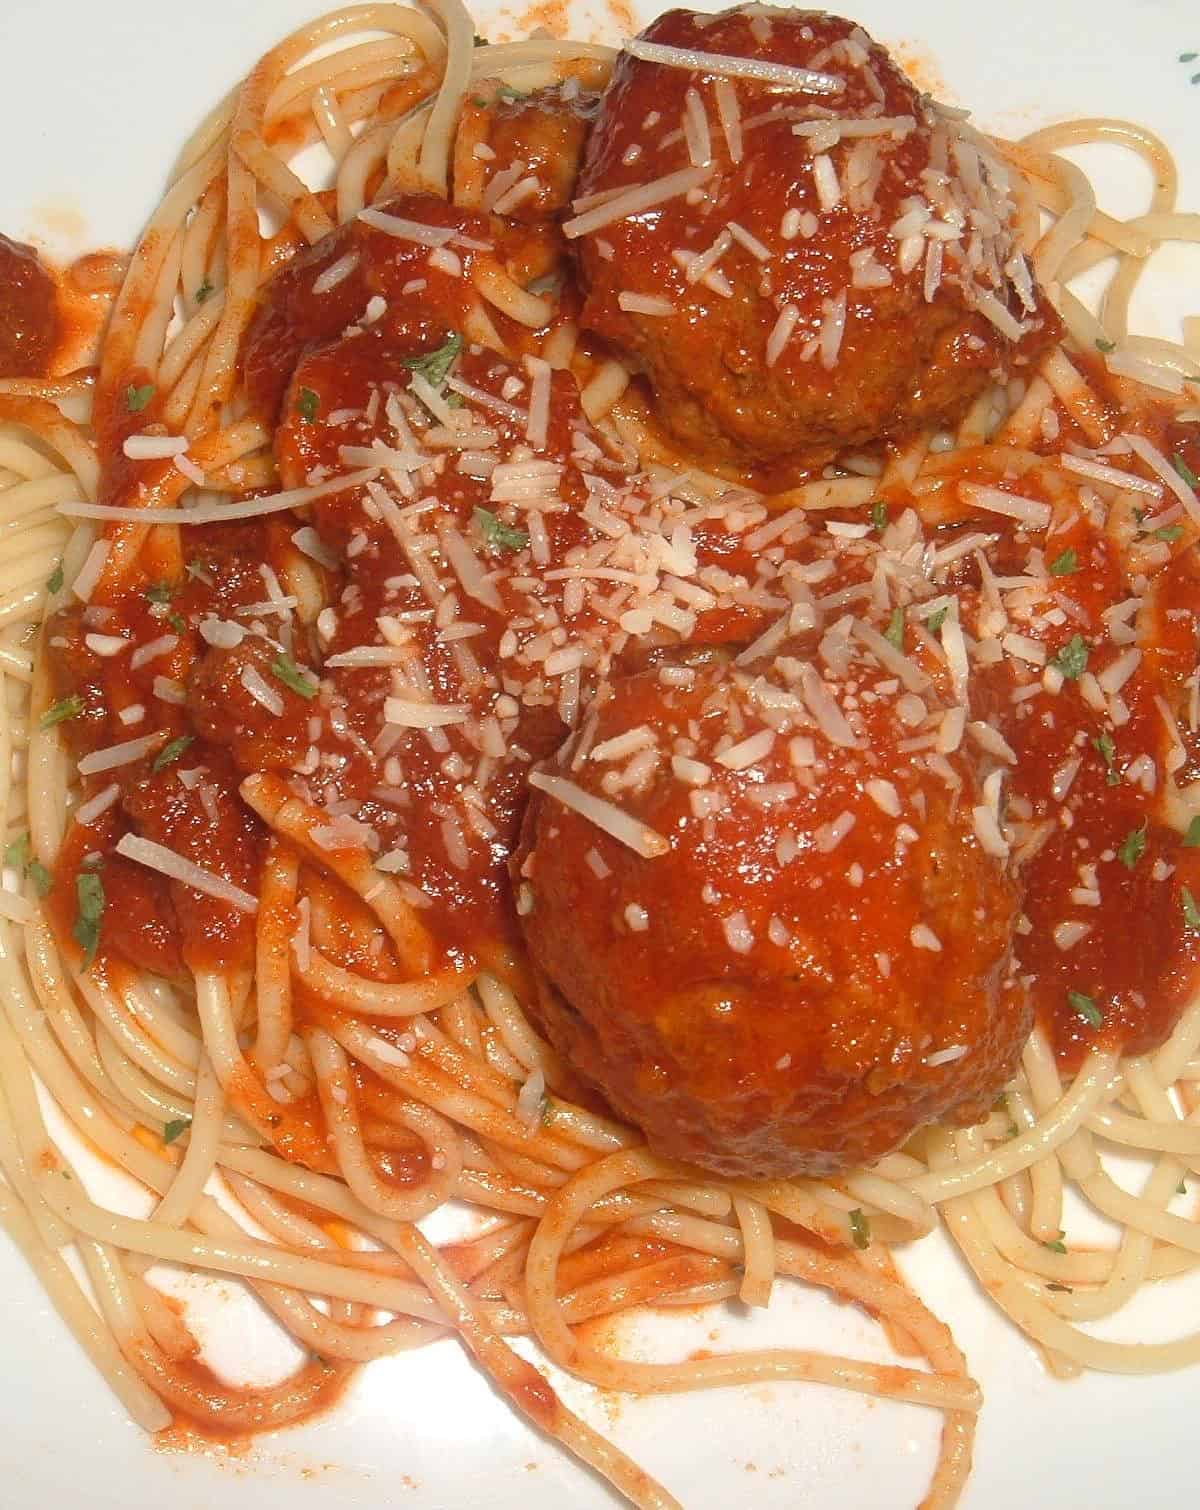  My secret to making the perfect meatball? A blend of ground beef, pork and veal!